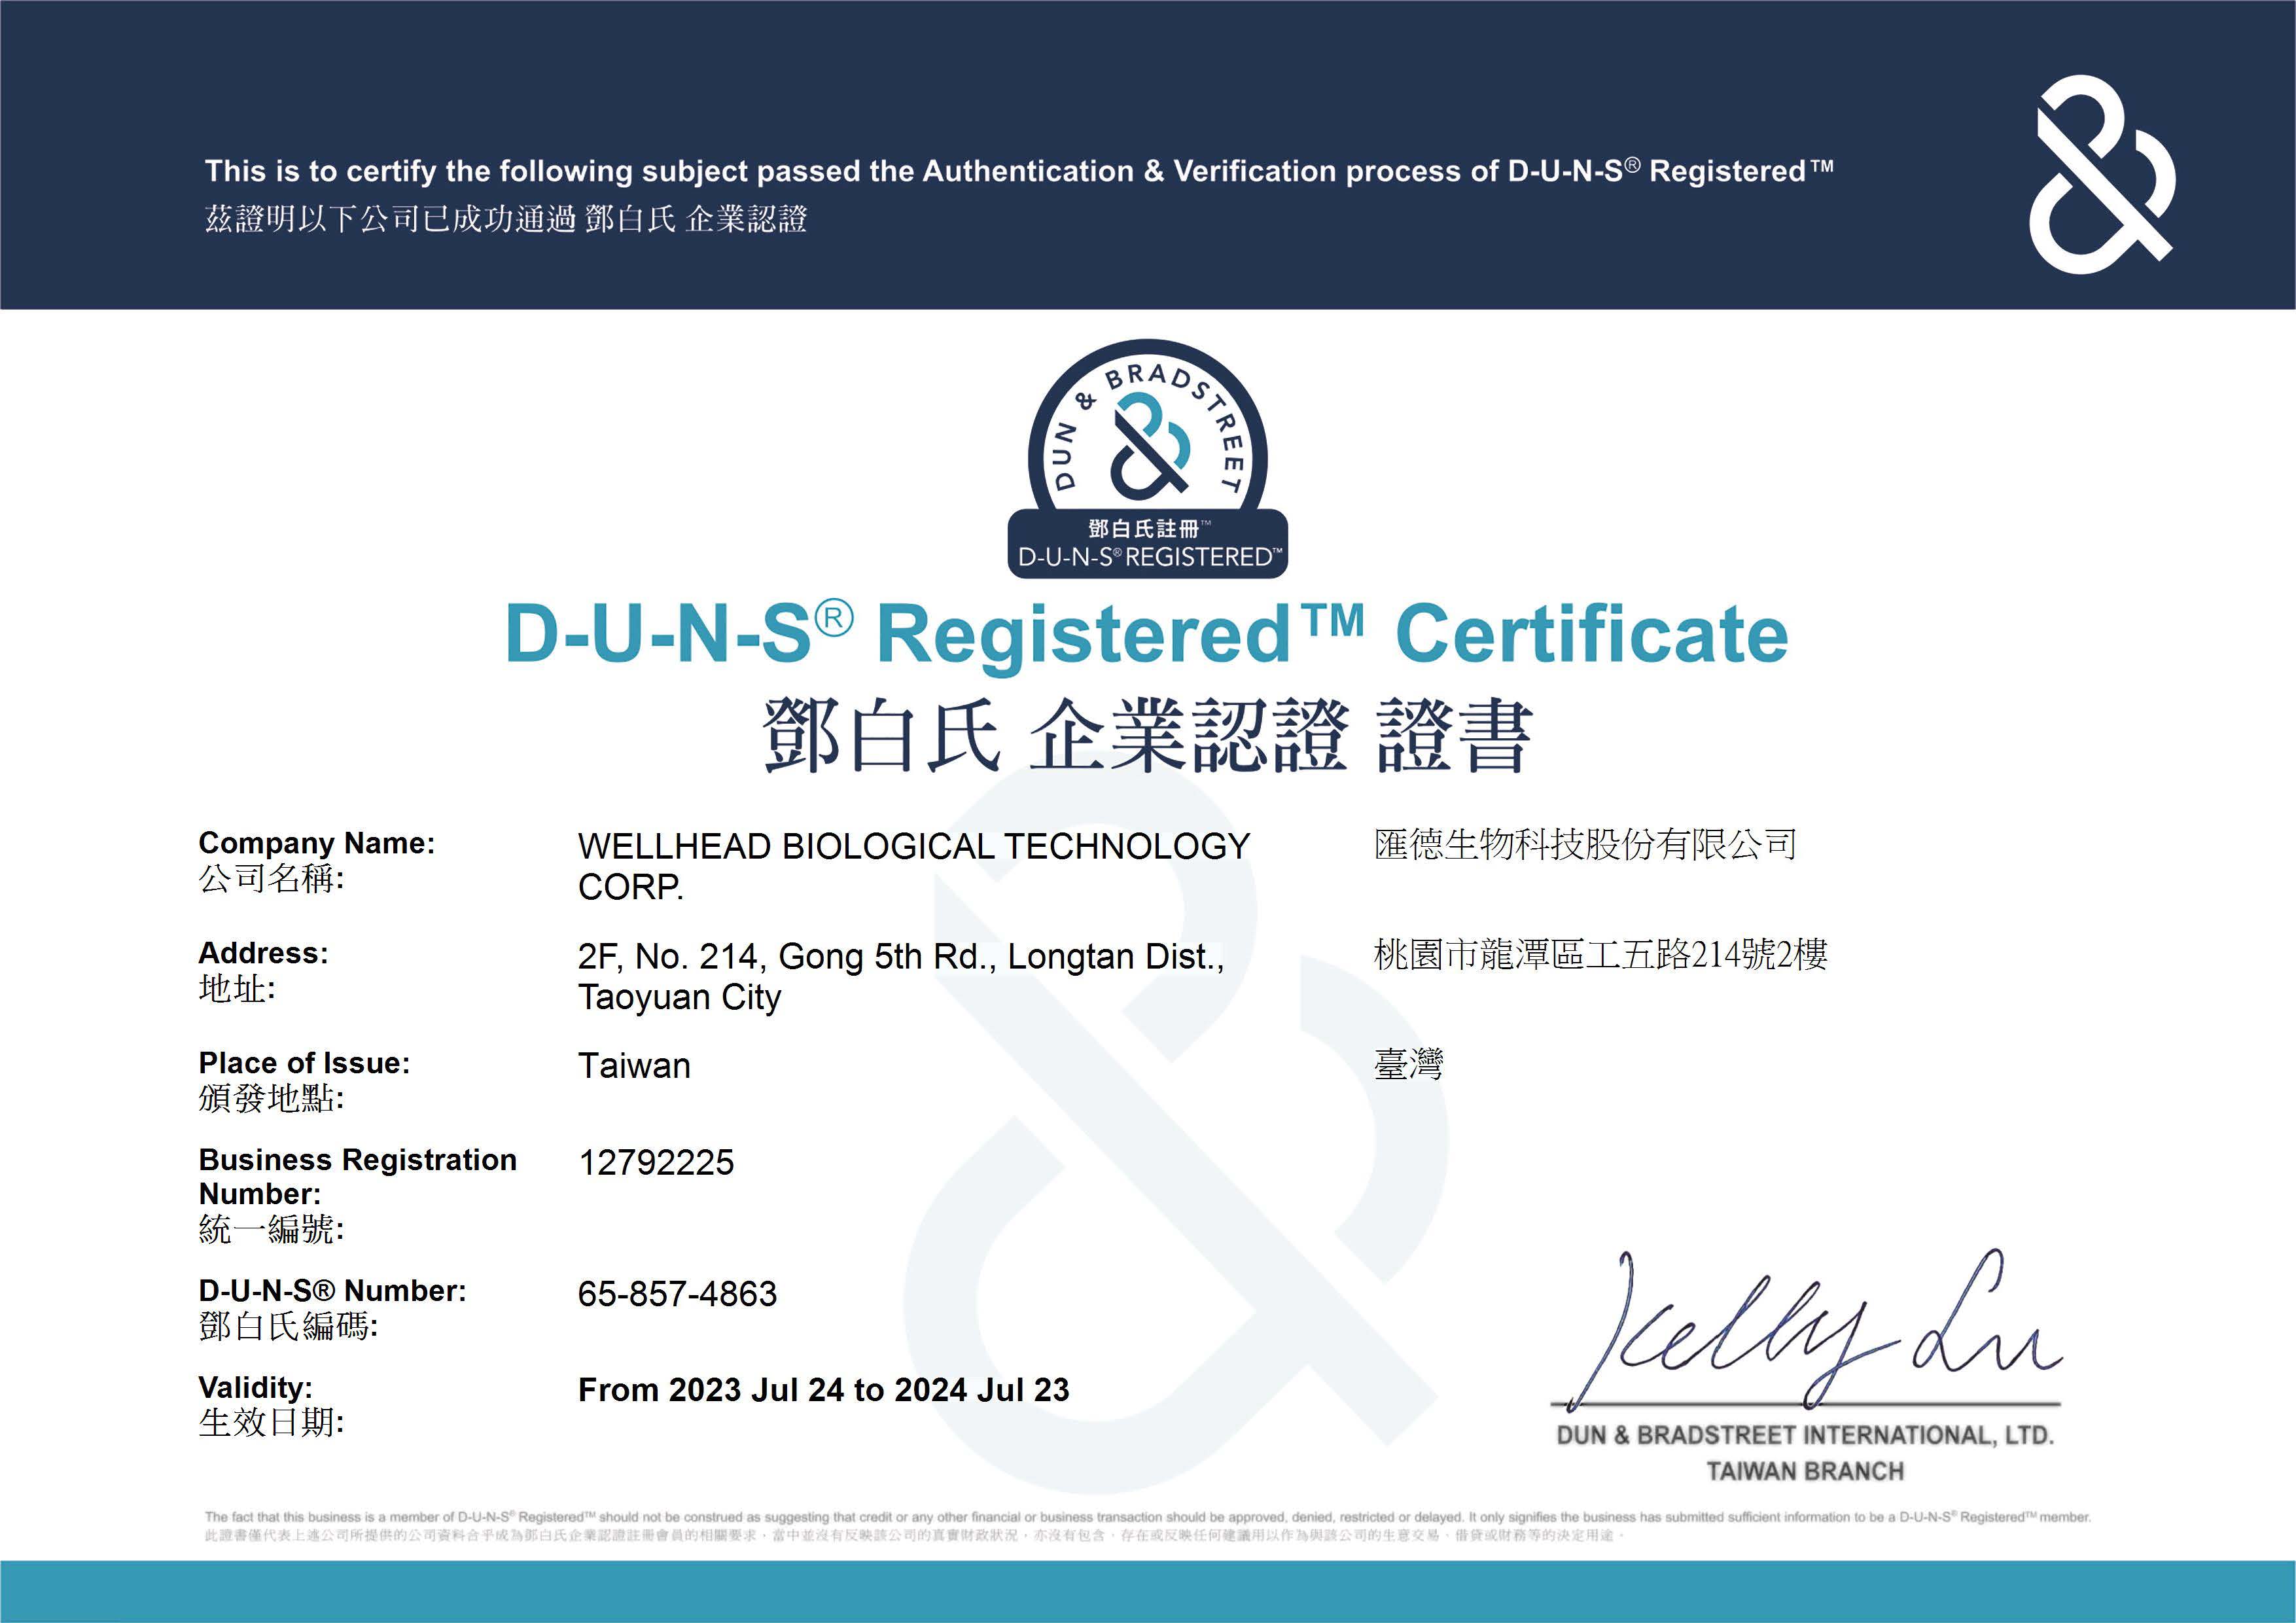 Wellhead Biological Technology Corp. obtained certification of D-U-N-S Registered